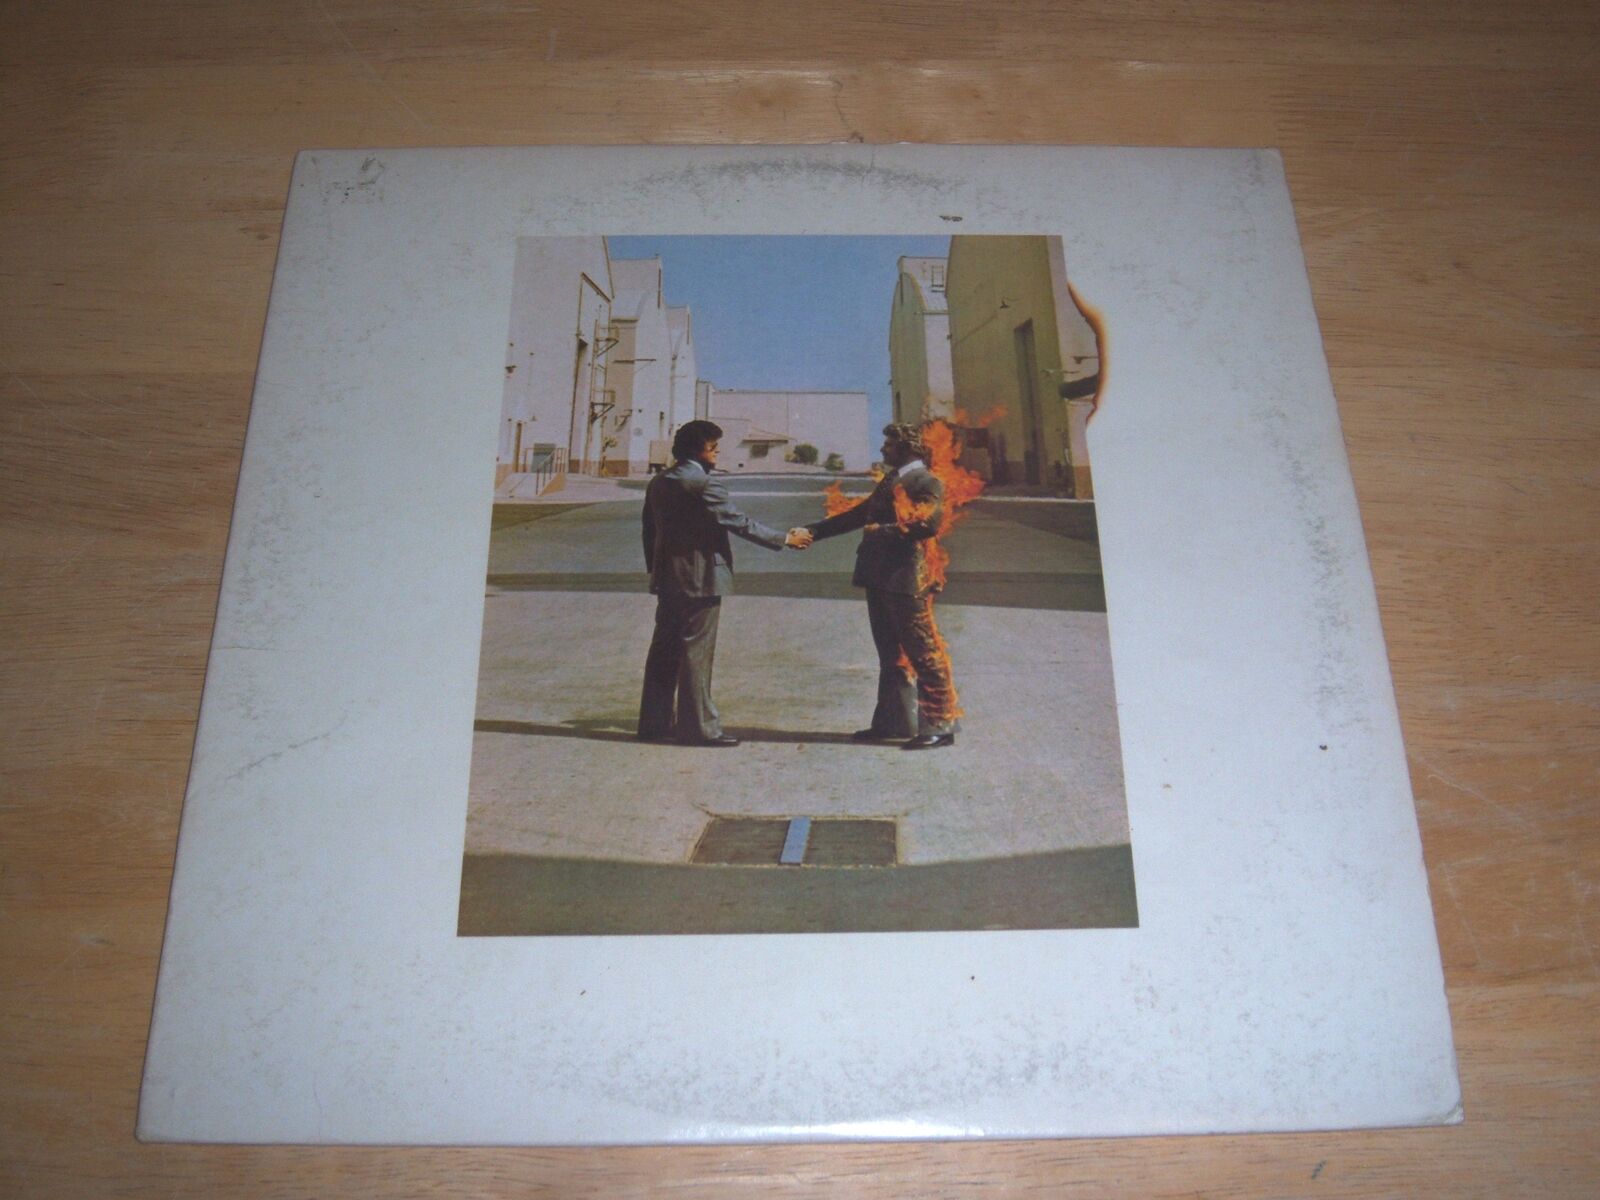 PINK FLOYD WISH YOU WERE HERE 1975 COLUMBIA JC 33453 STEREO 4AH 5AG VG+ VG+